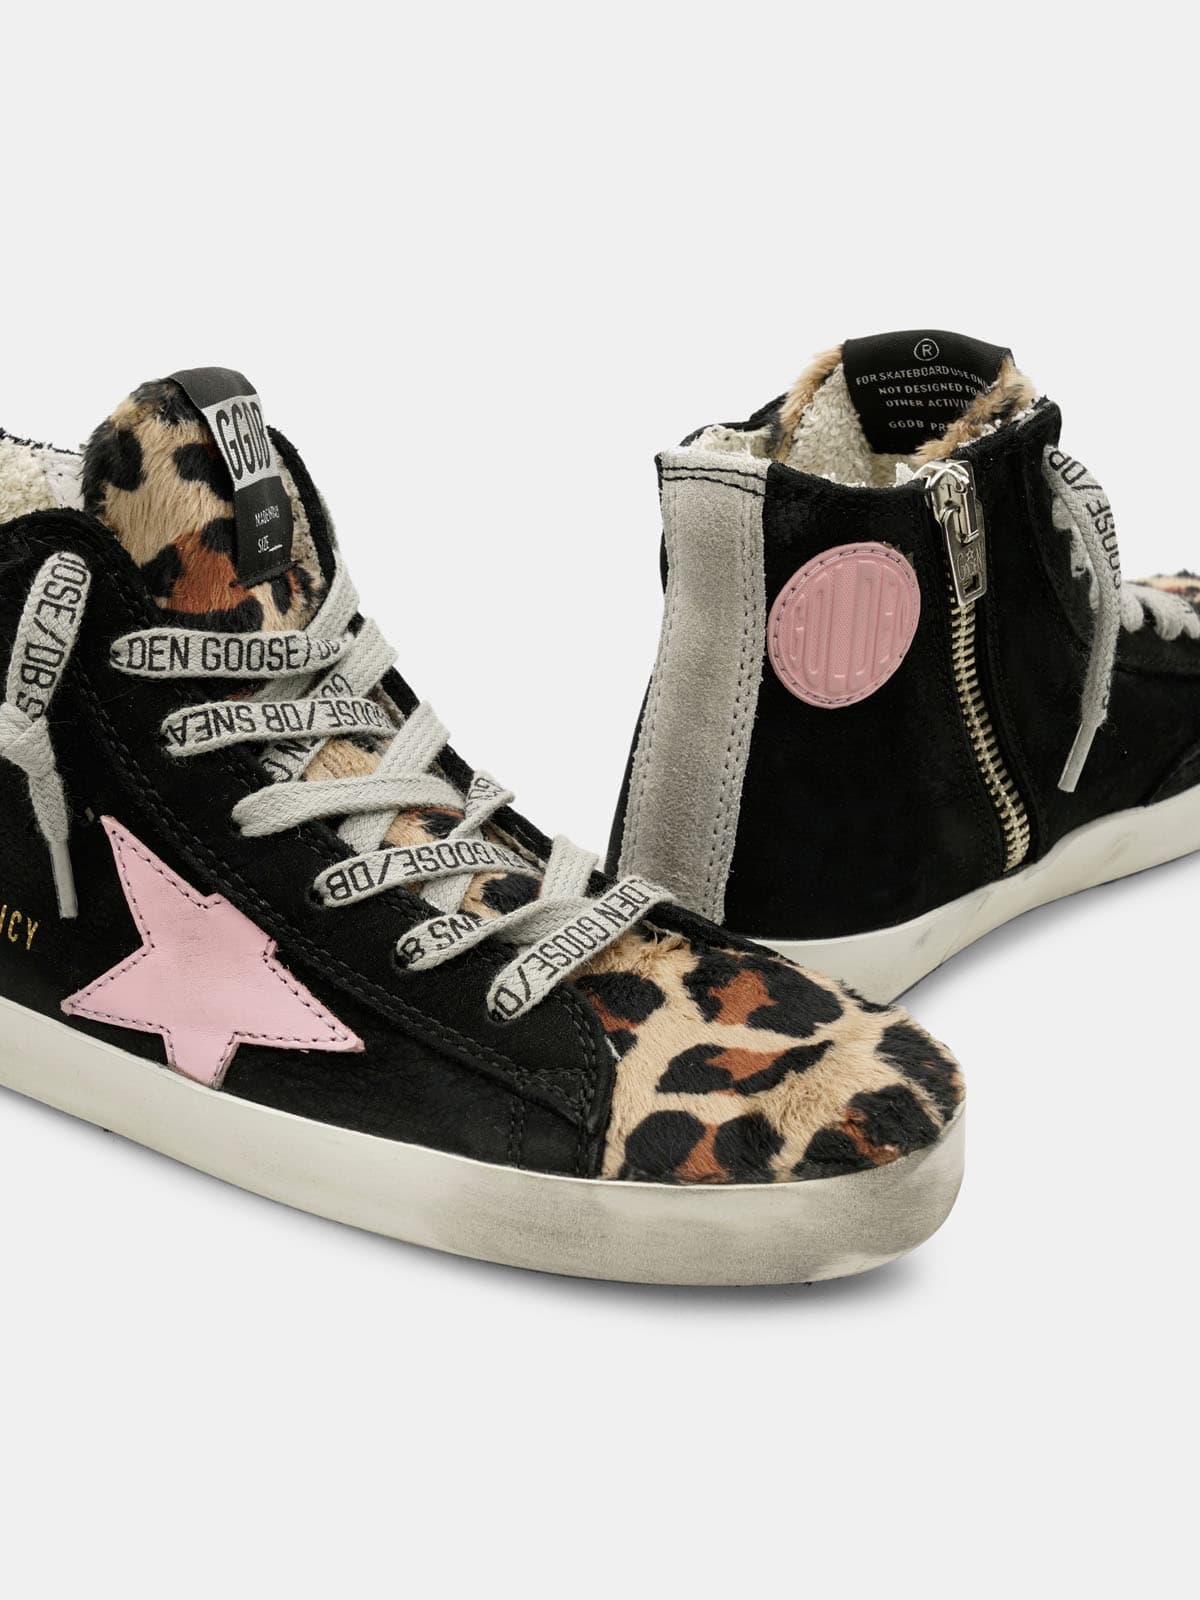 Francy sneakers made of nubuck and pony skin with a leopard print.